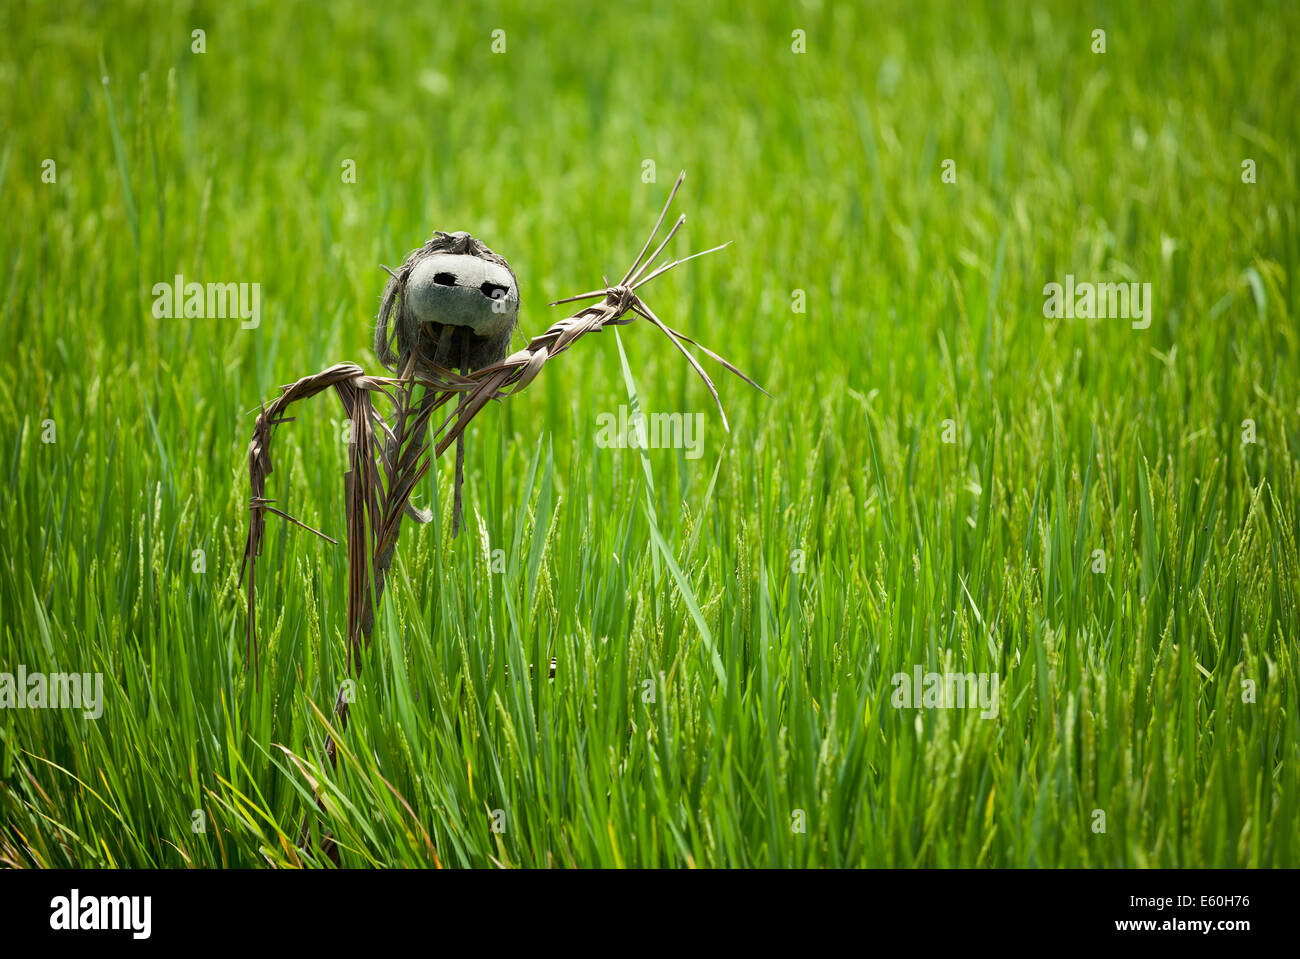 Scarecrow on rice field with a coconut head Stock Photo